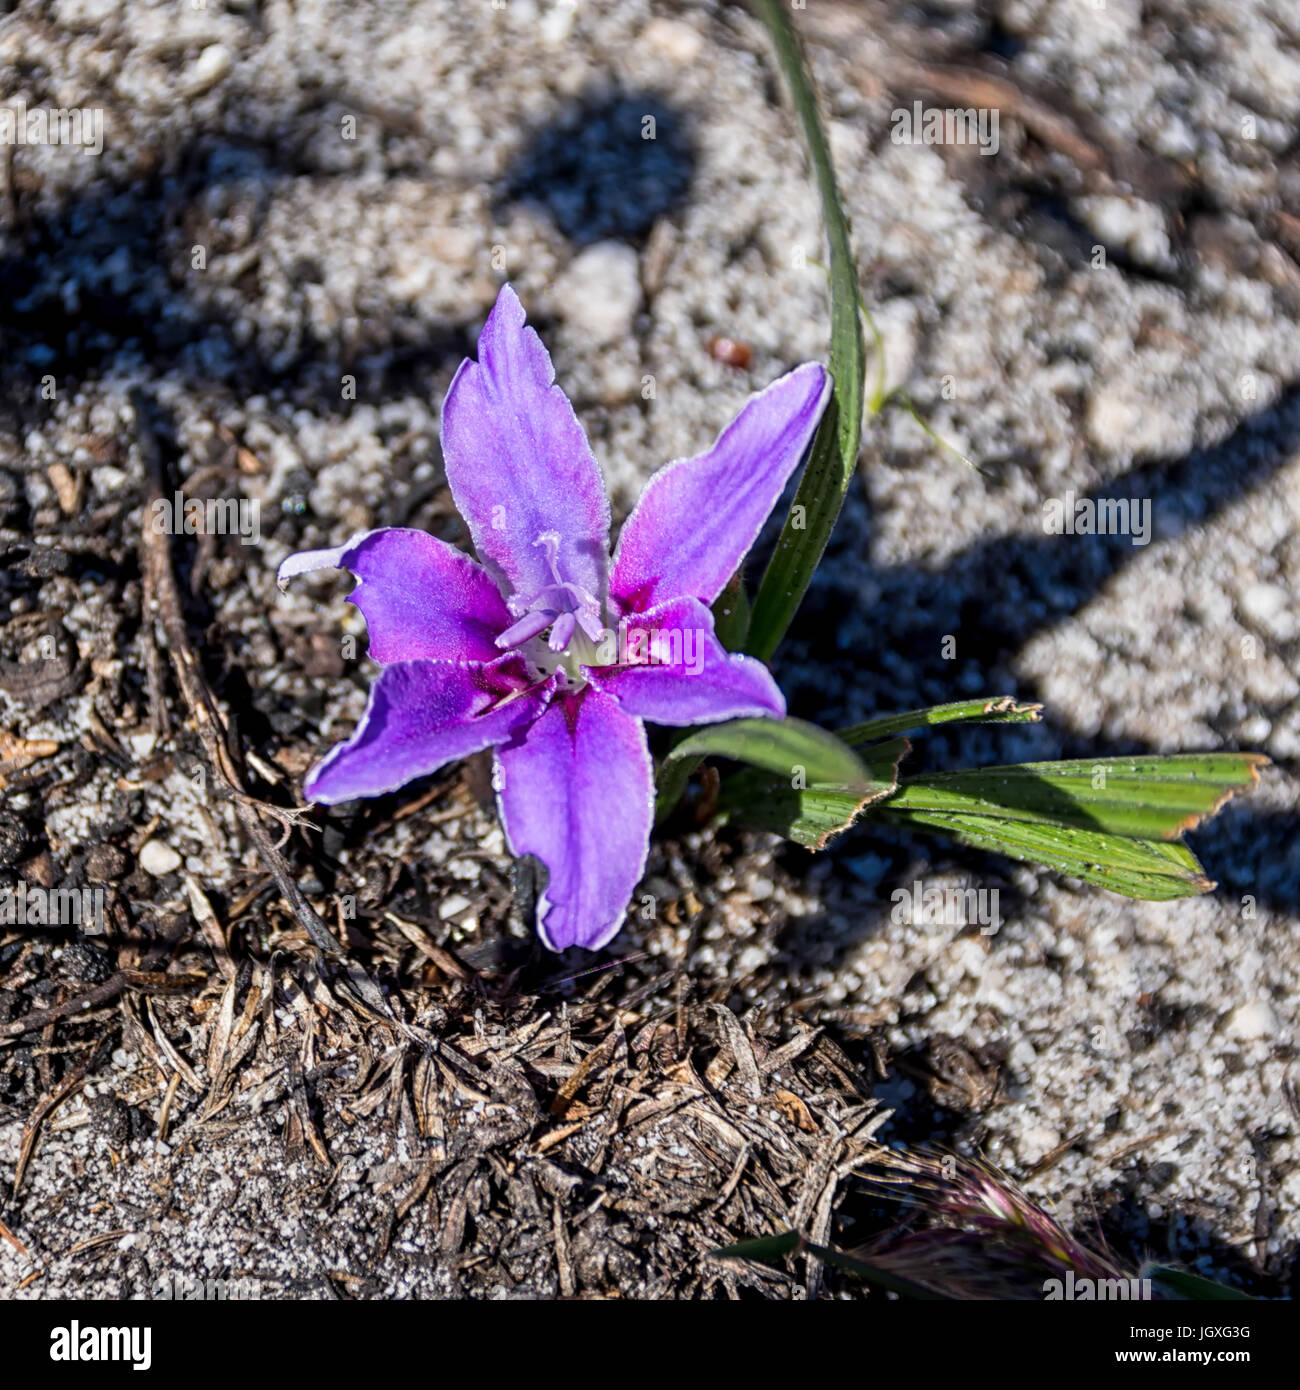 babiana ambigua flower in the Southern Cape, South Africa Stock Photo